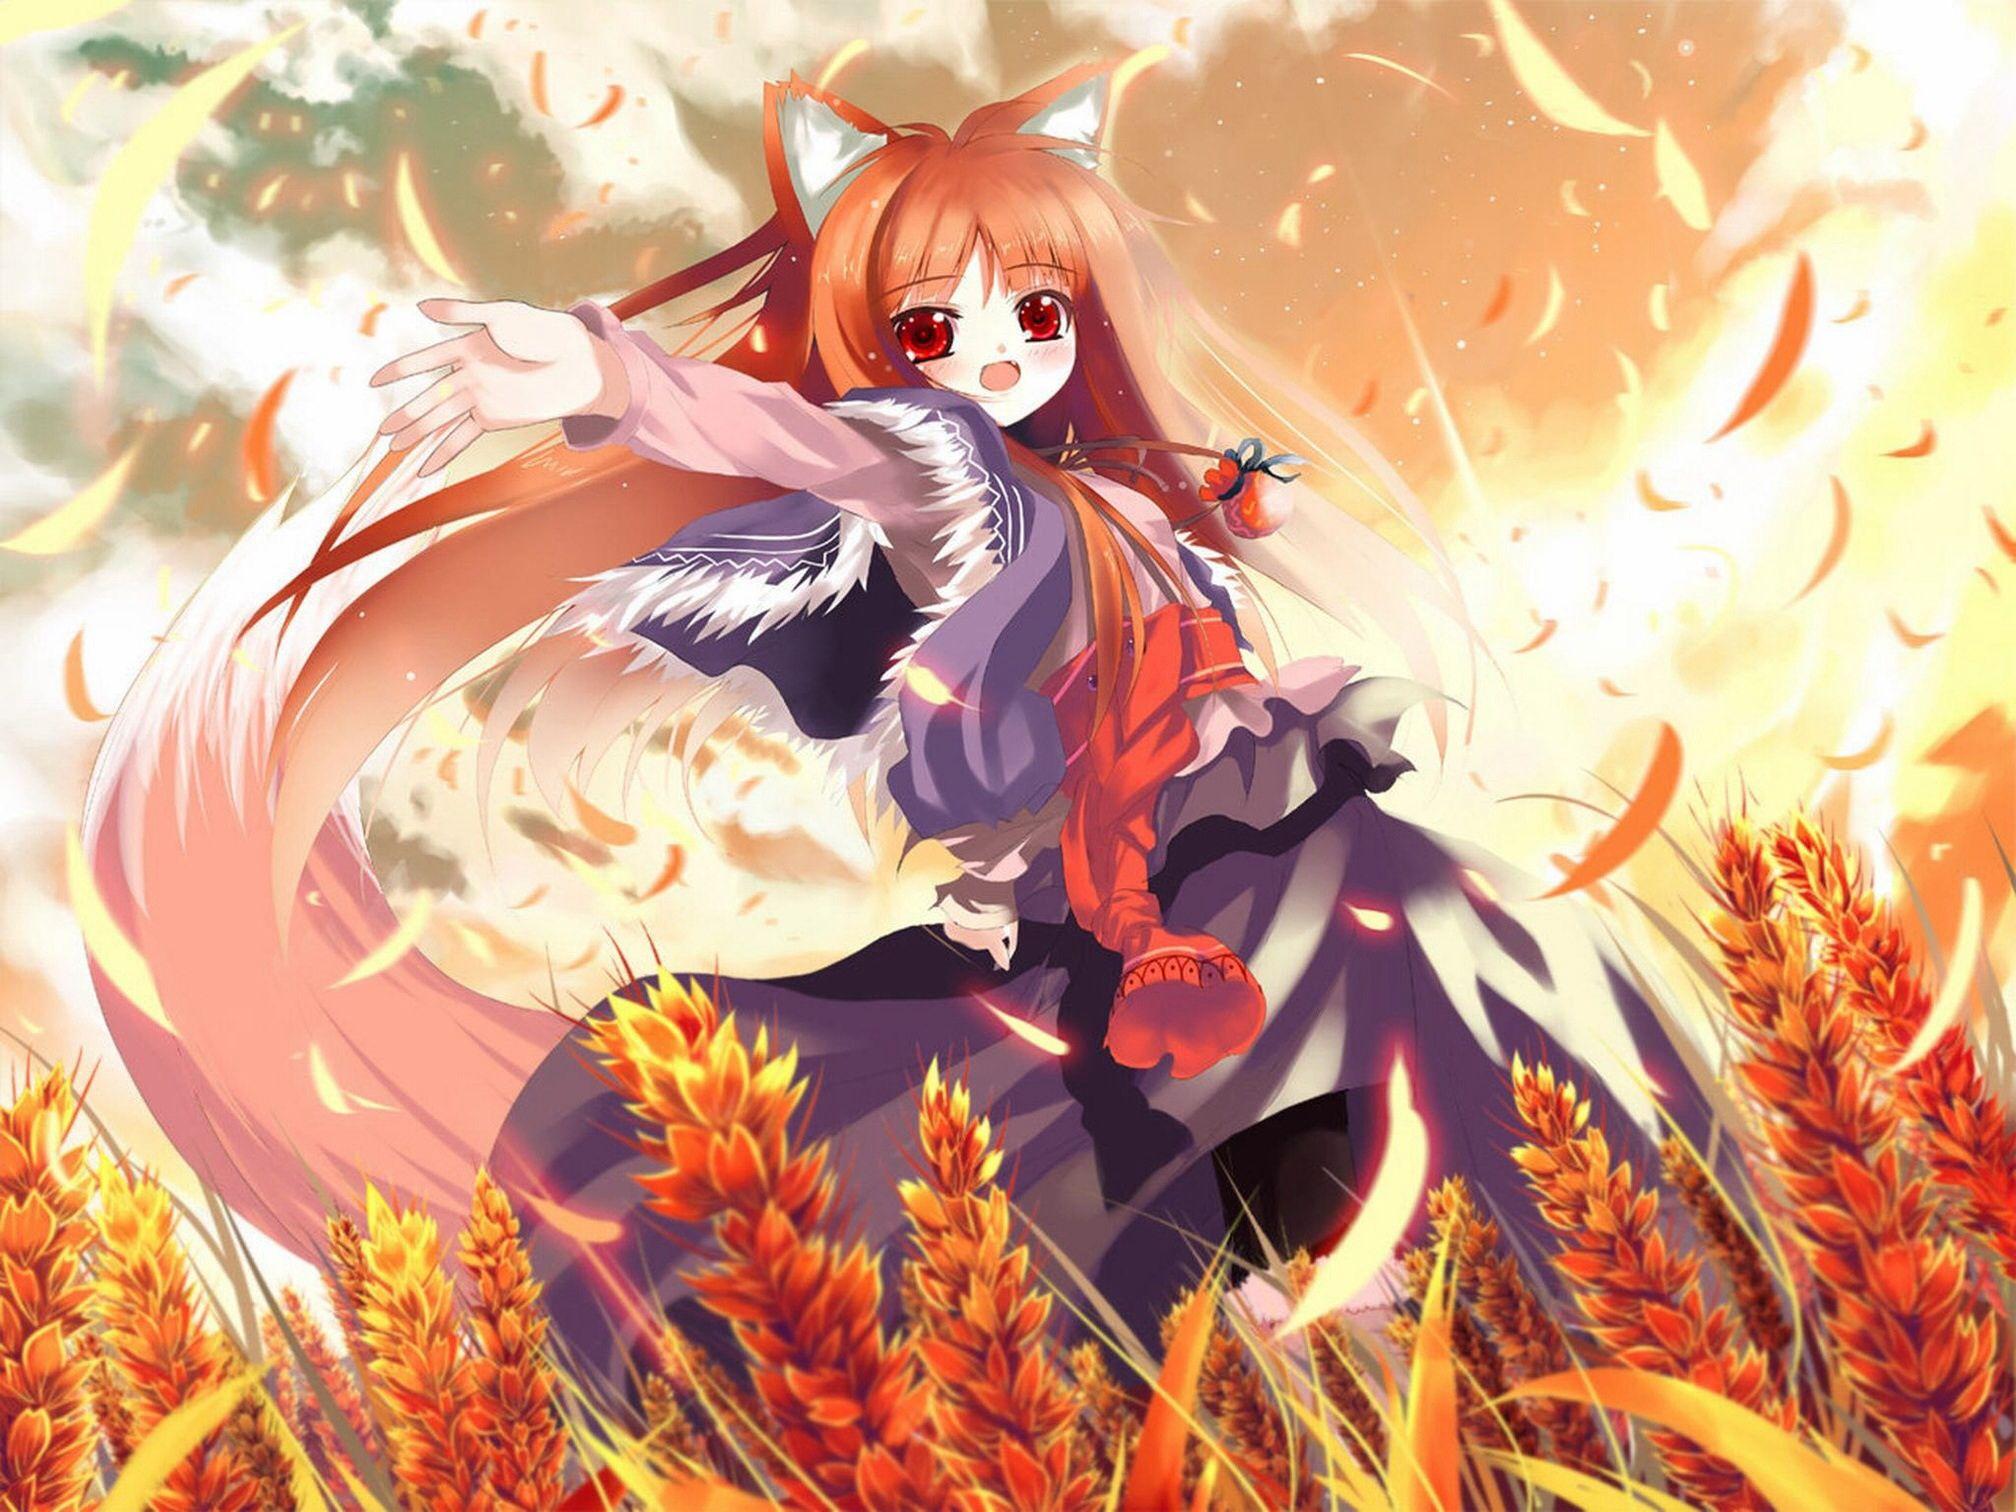 Spice and wolf. anime. Anime wolf girl, Spice, wolf, Anime